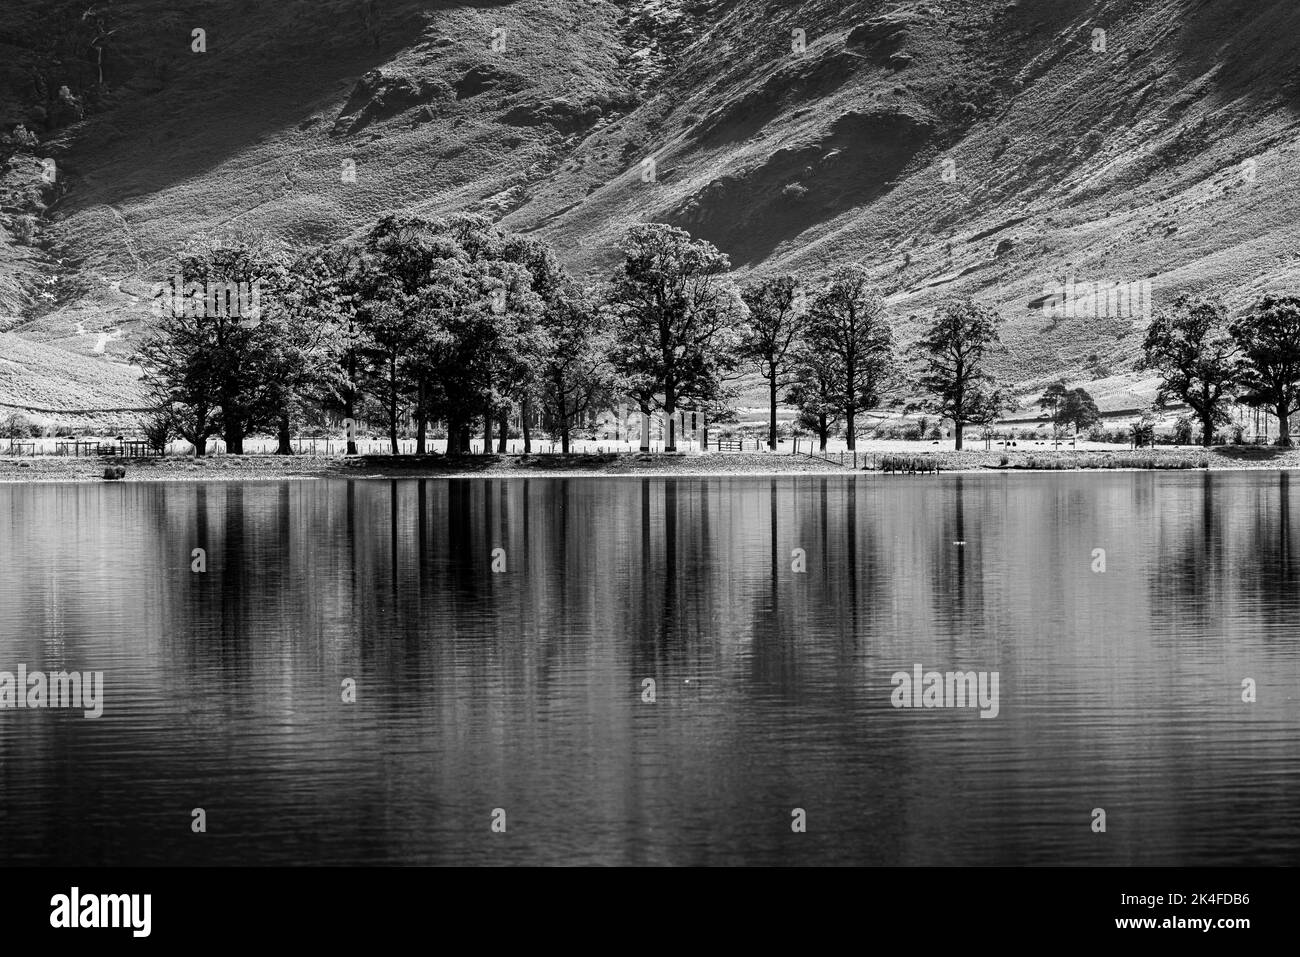 Reflections on the Water at Buttermere, Lake District, Cumbria, England, UK Stockfoto